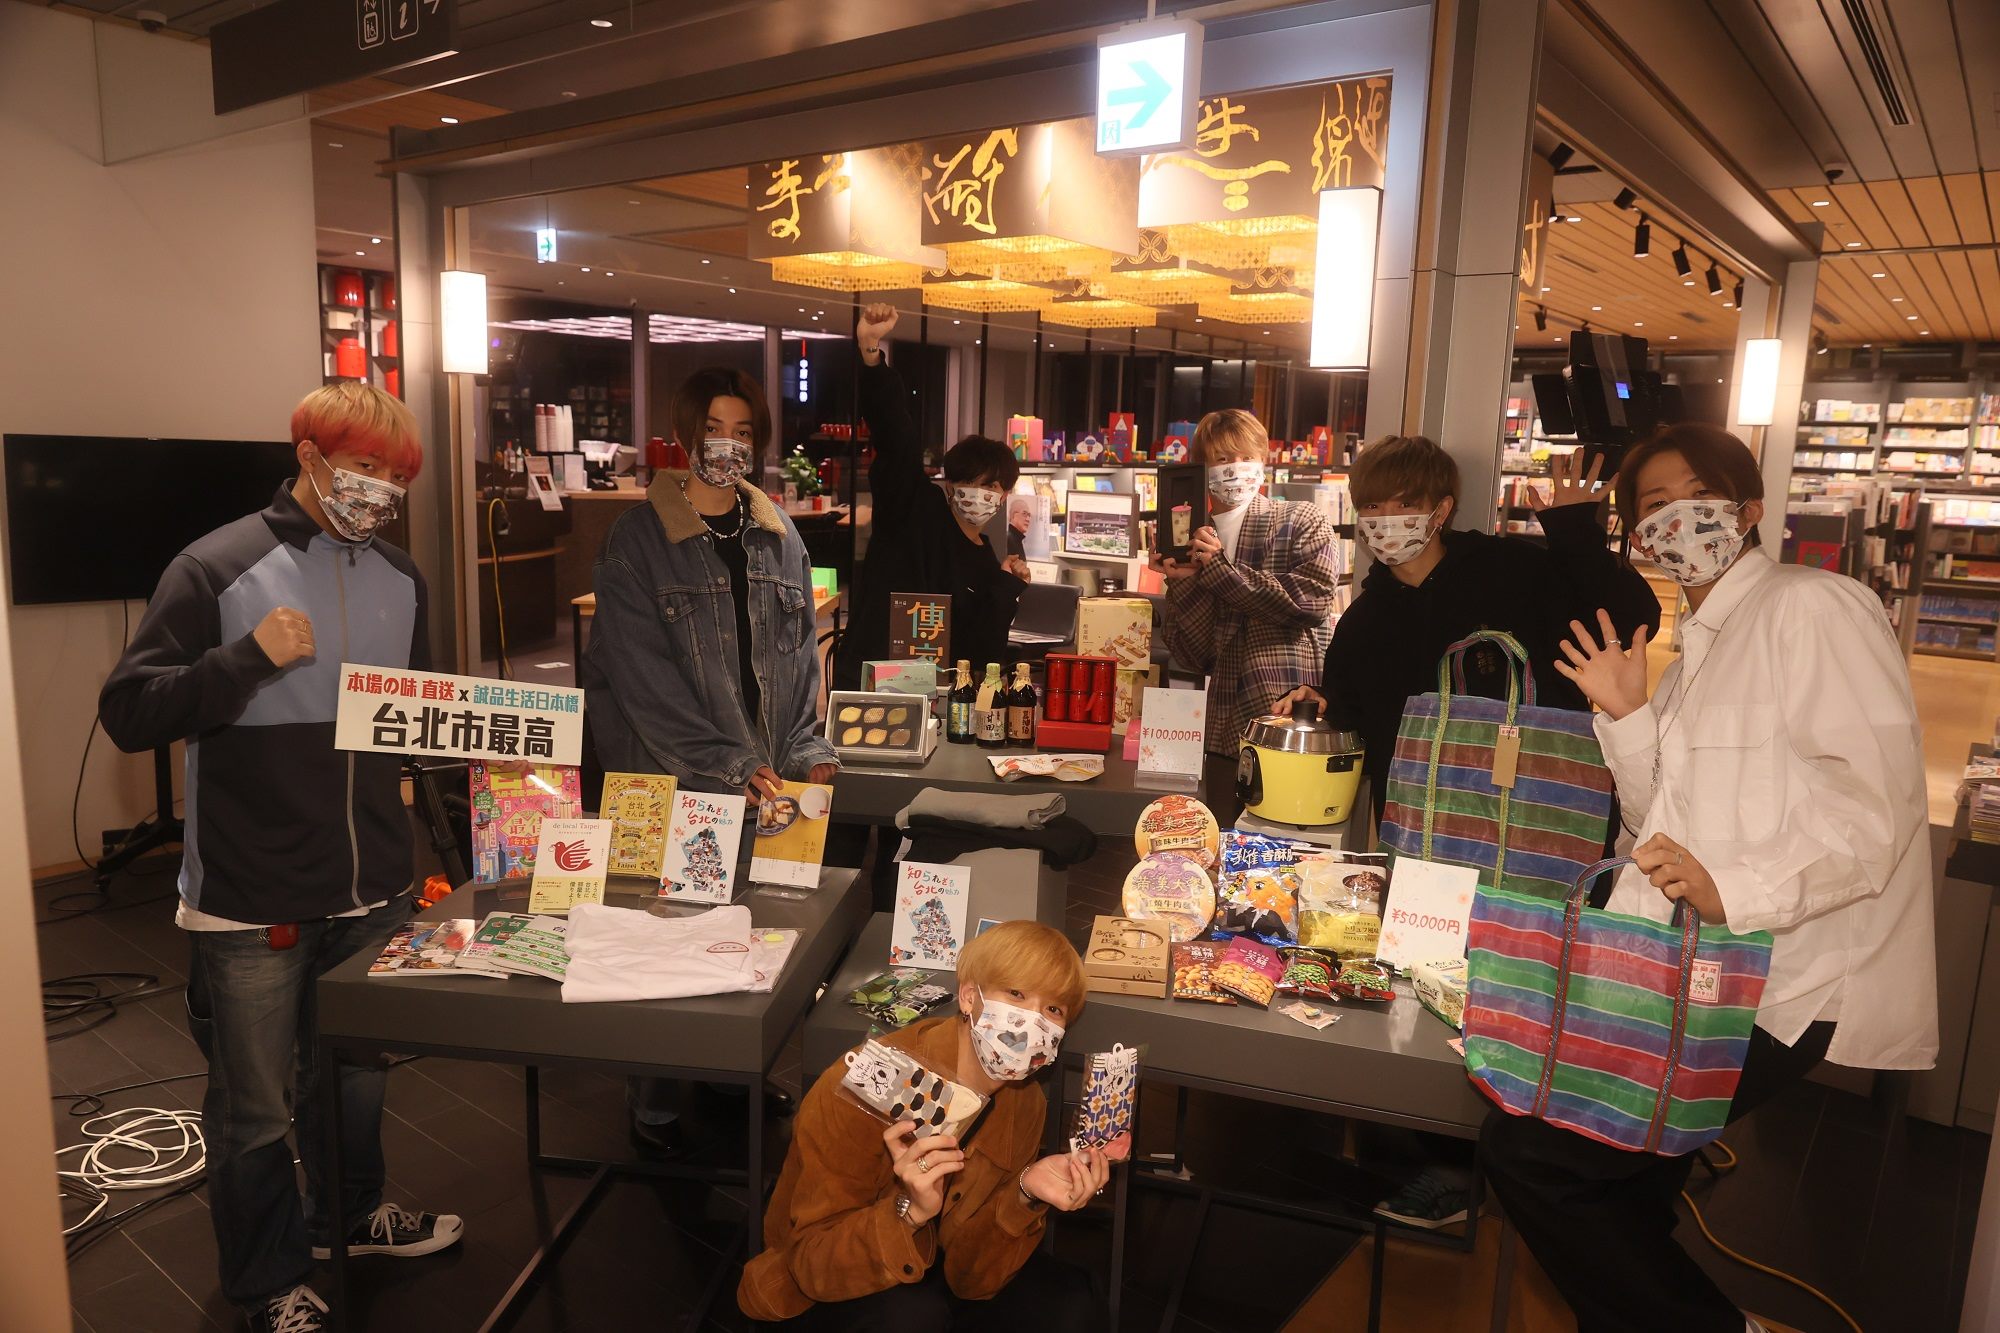 FANTASTICS hosted a live unboxing event featuring Taipei-related products. (Photo / Provided by the Taipei City Government)